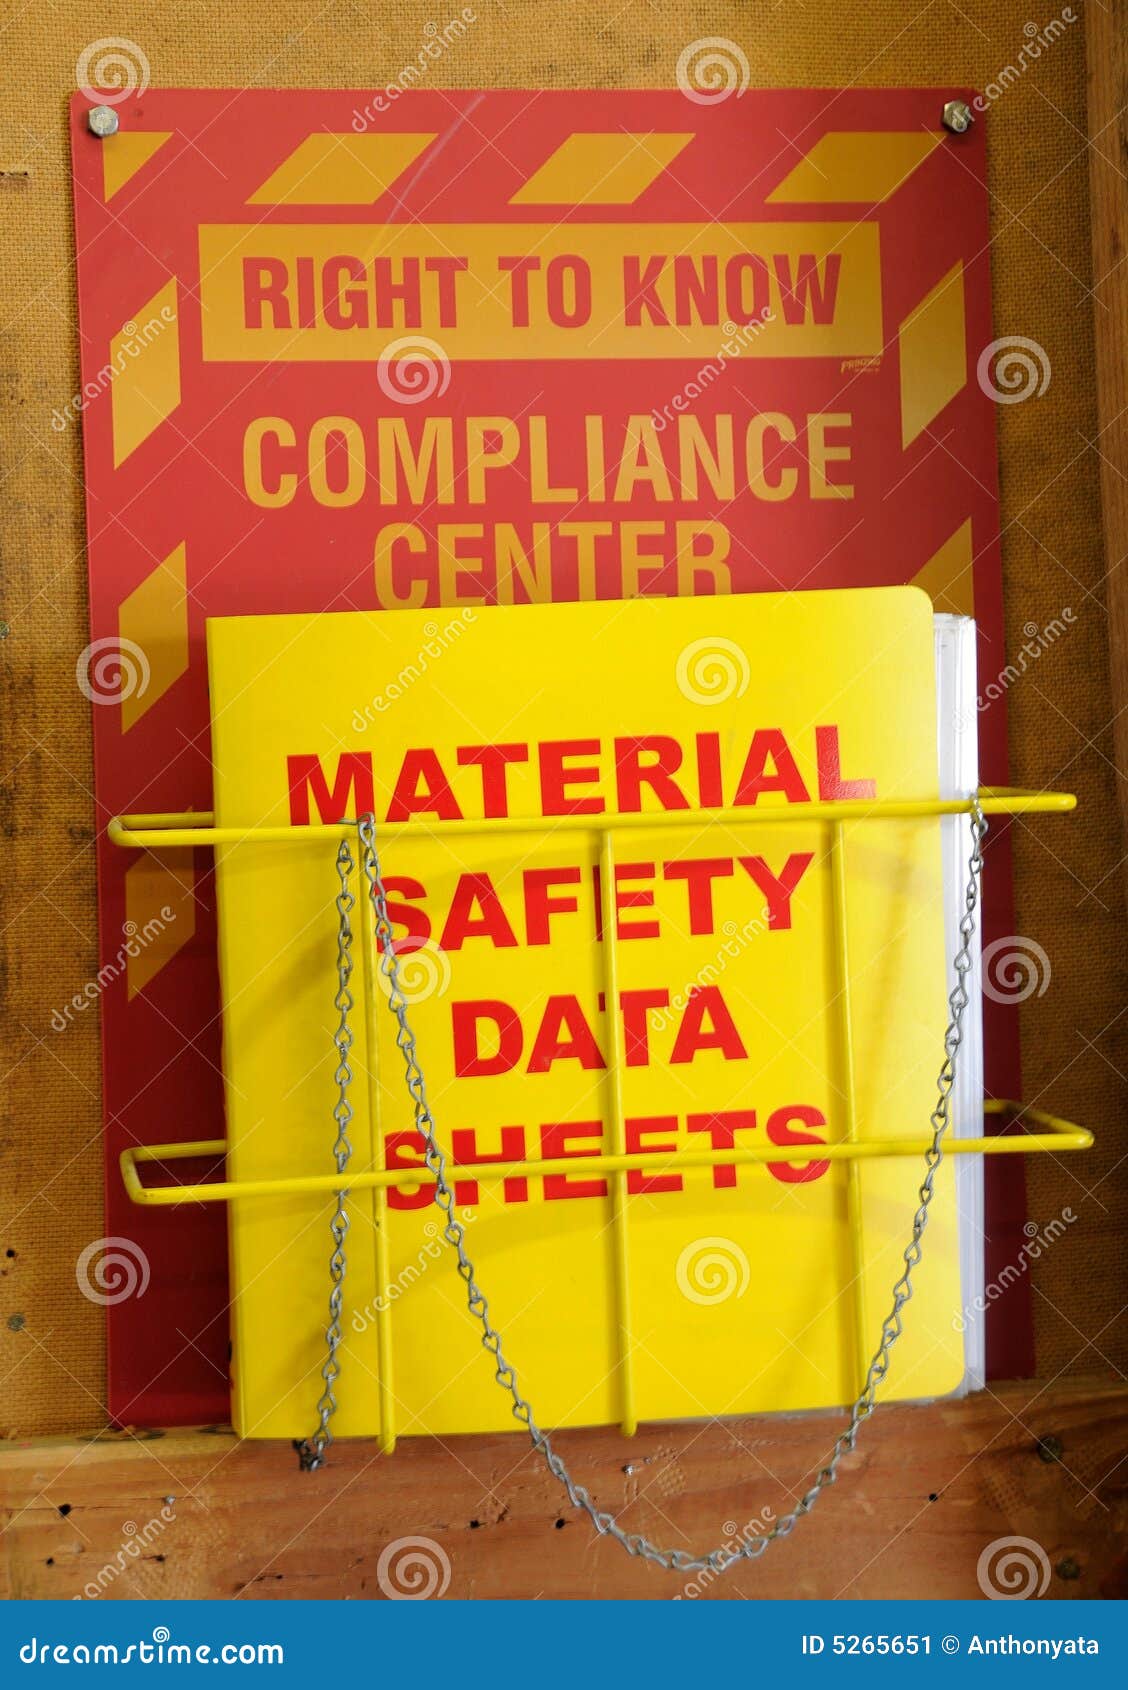 compliance material data